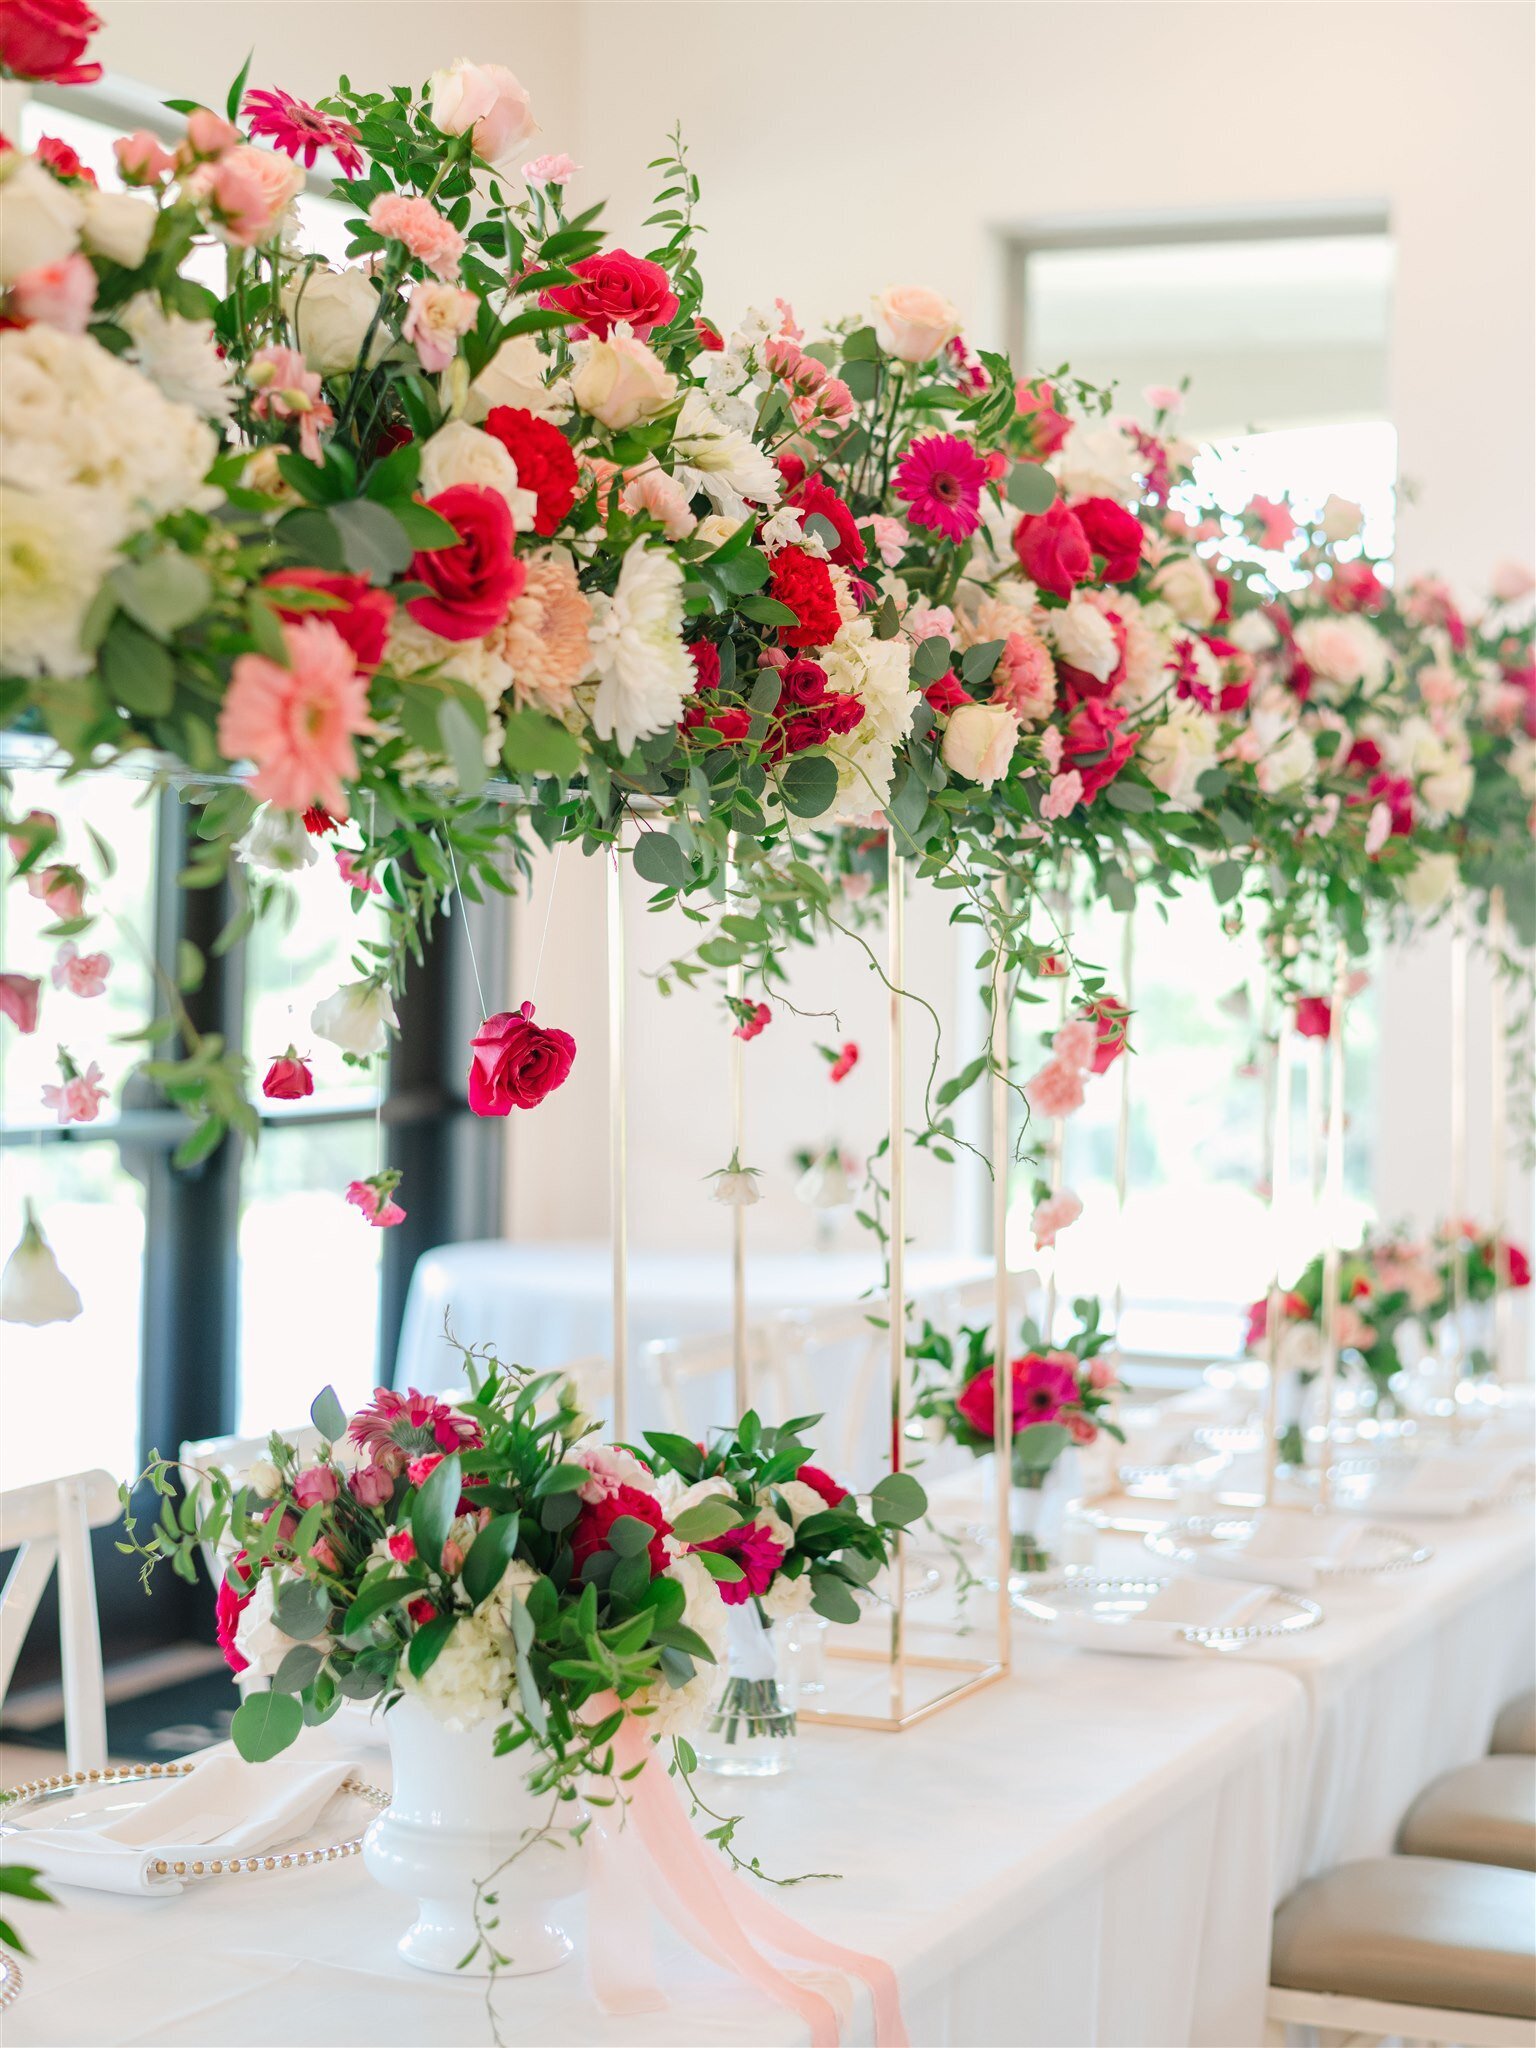 luxury wedding display with white, pink and red flowers